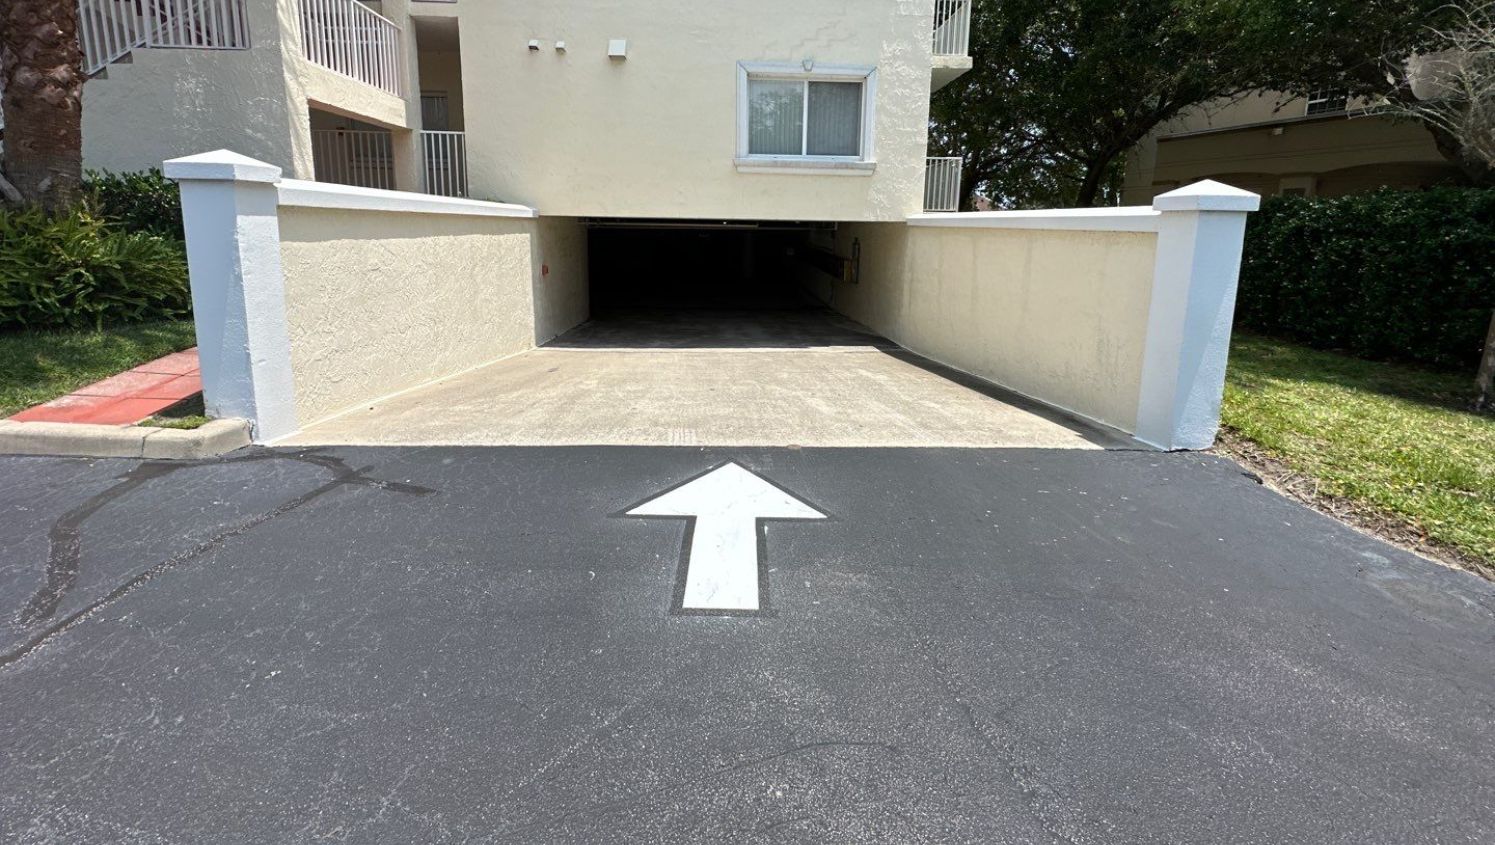 an arrow on the street pointing to a garage